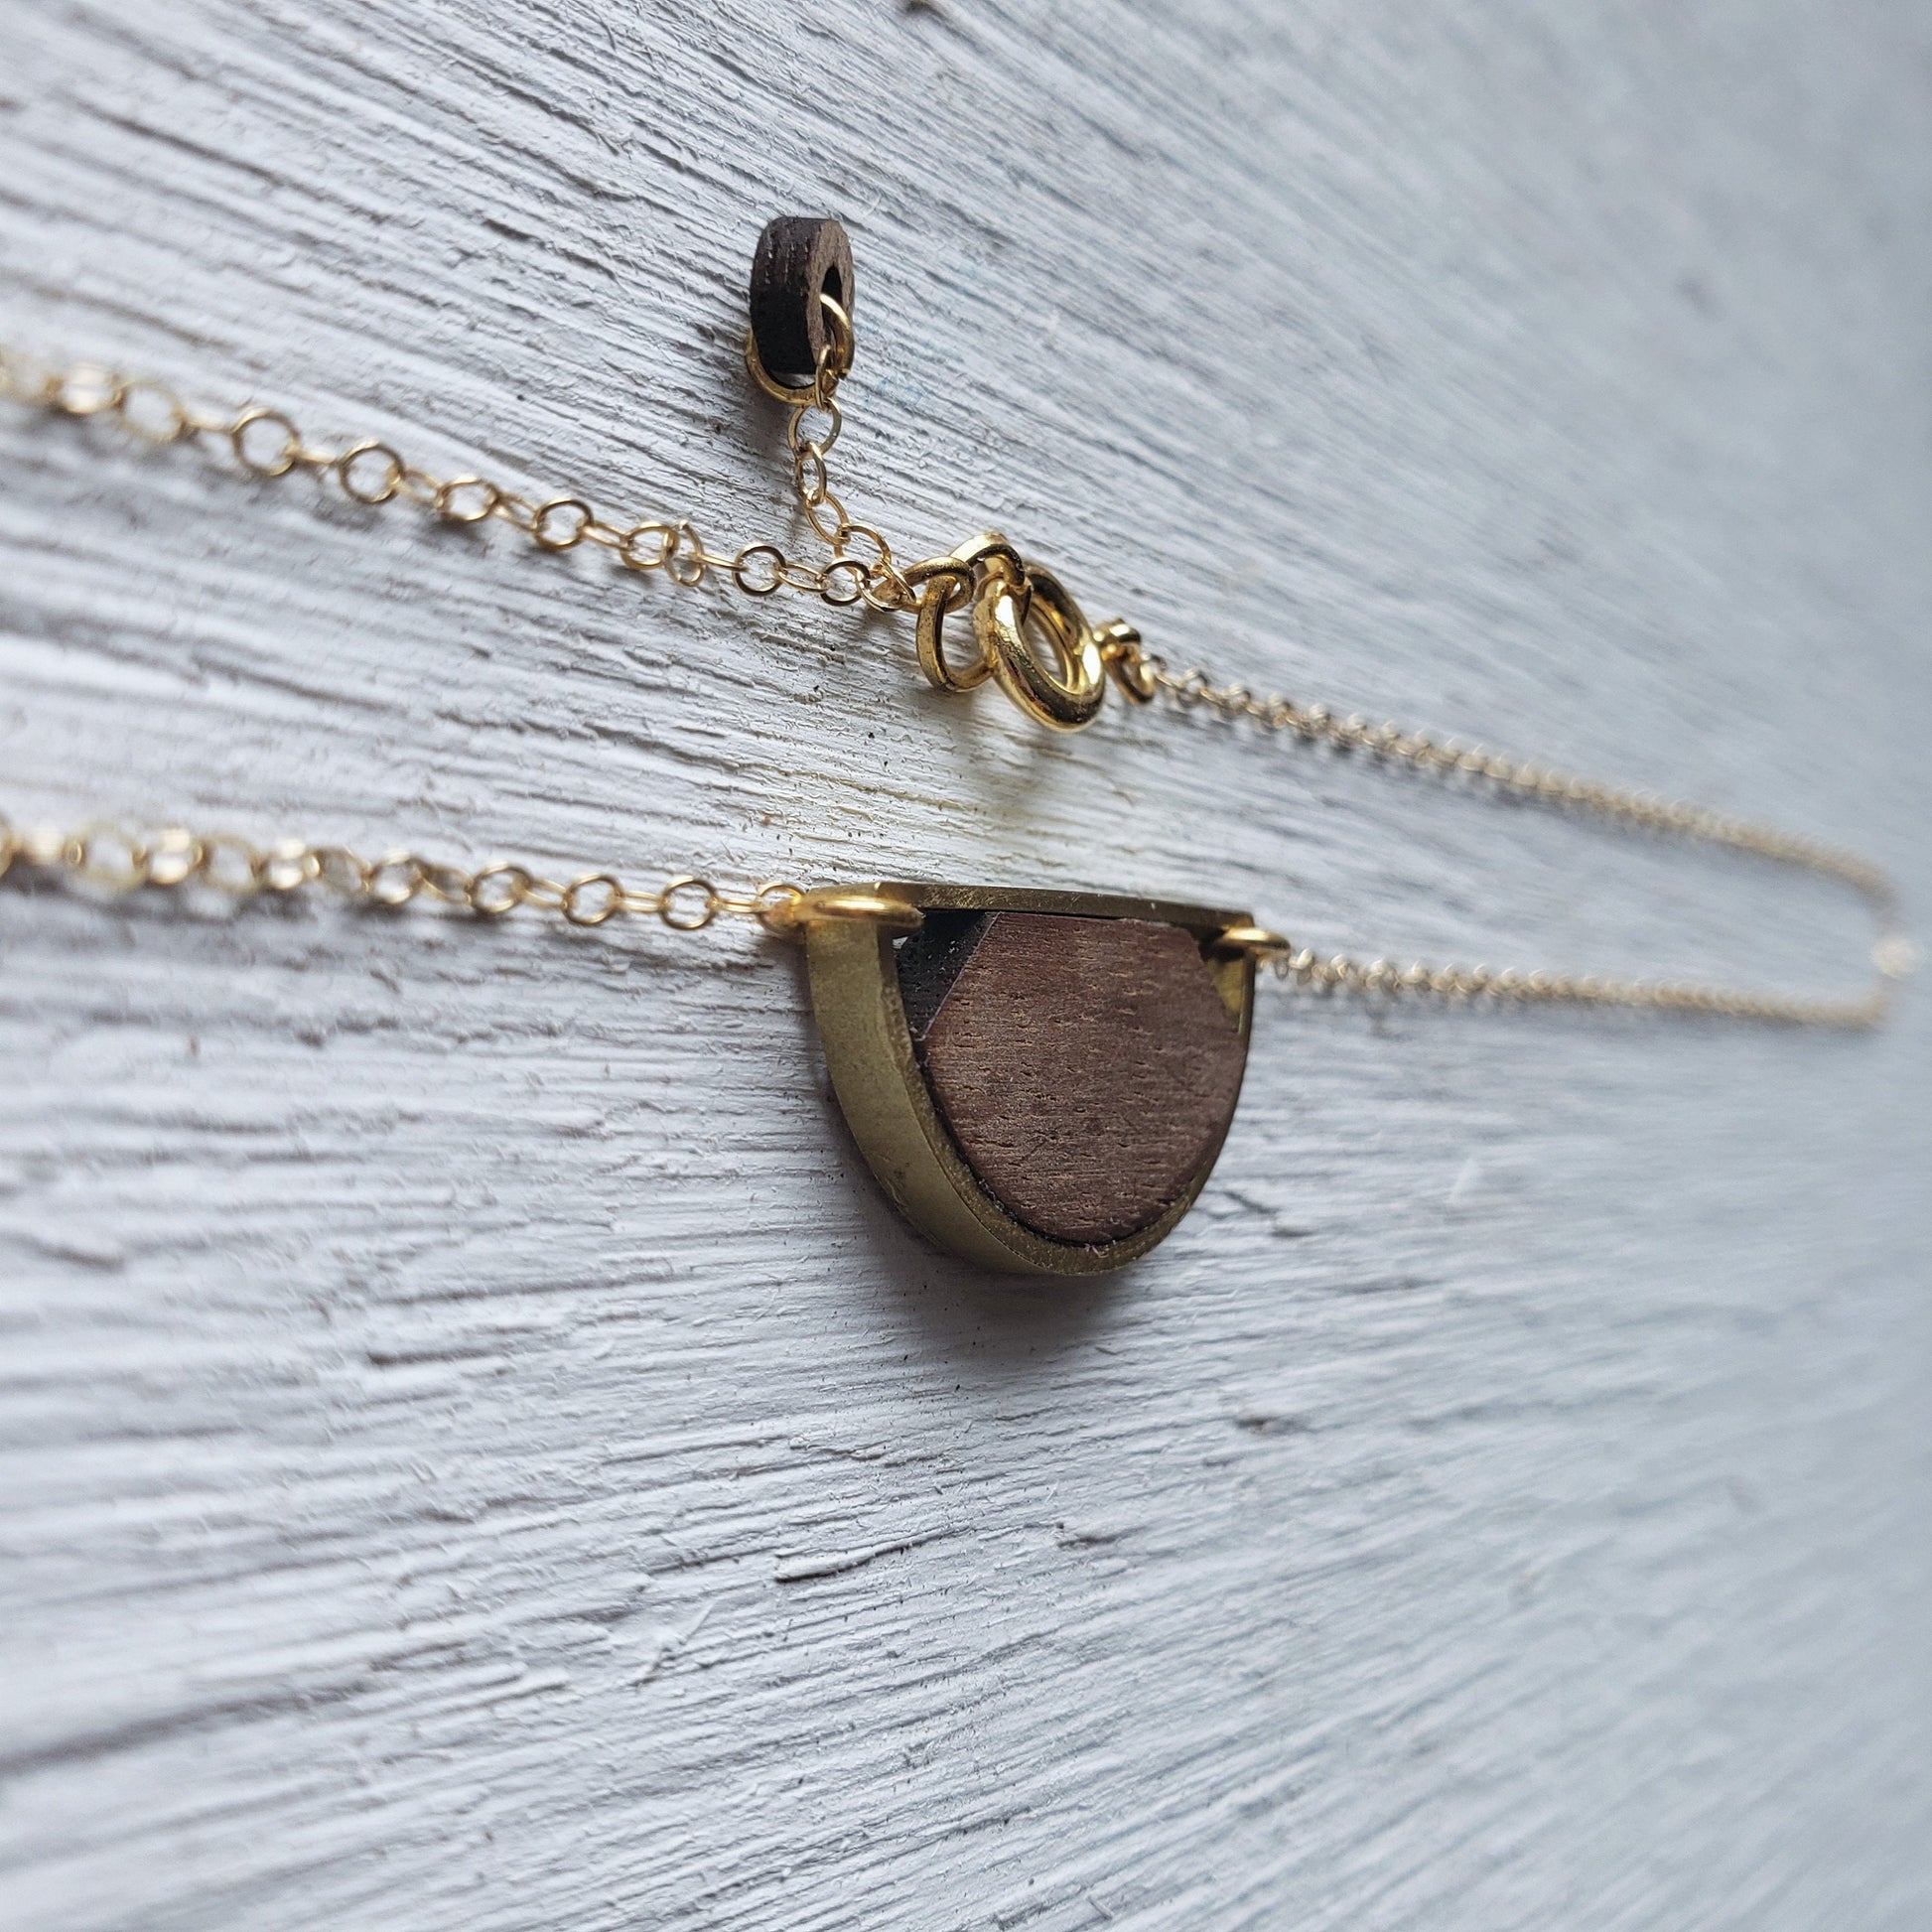 Quarter Moon Necklace- Wooden Laser Cut Jewelry || Gift for women, dainty necklace